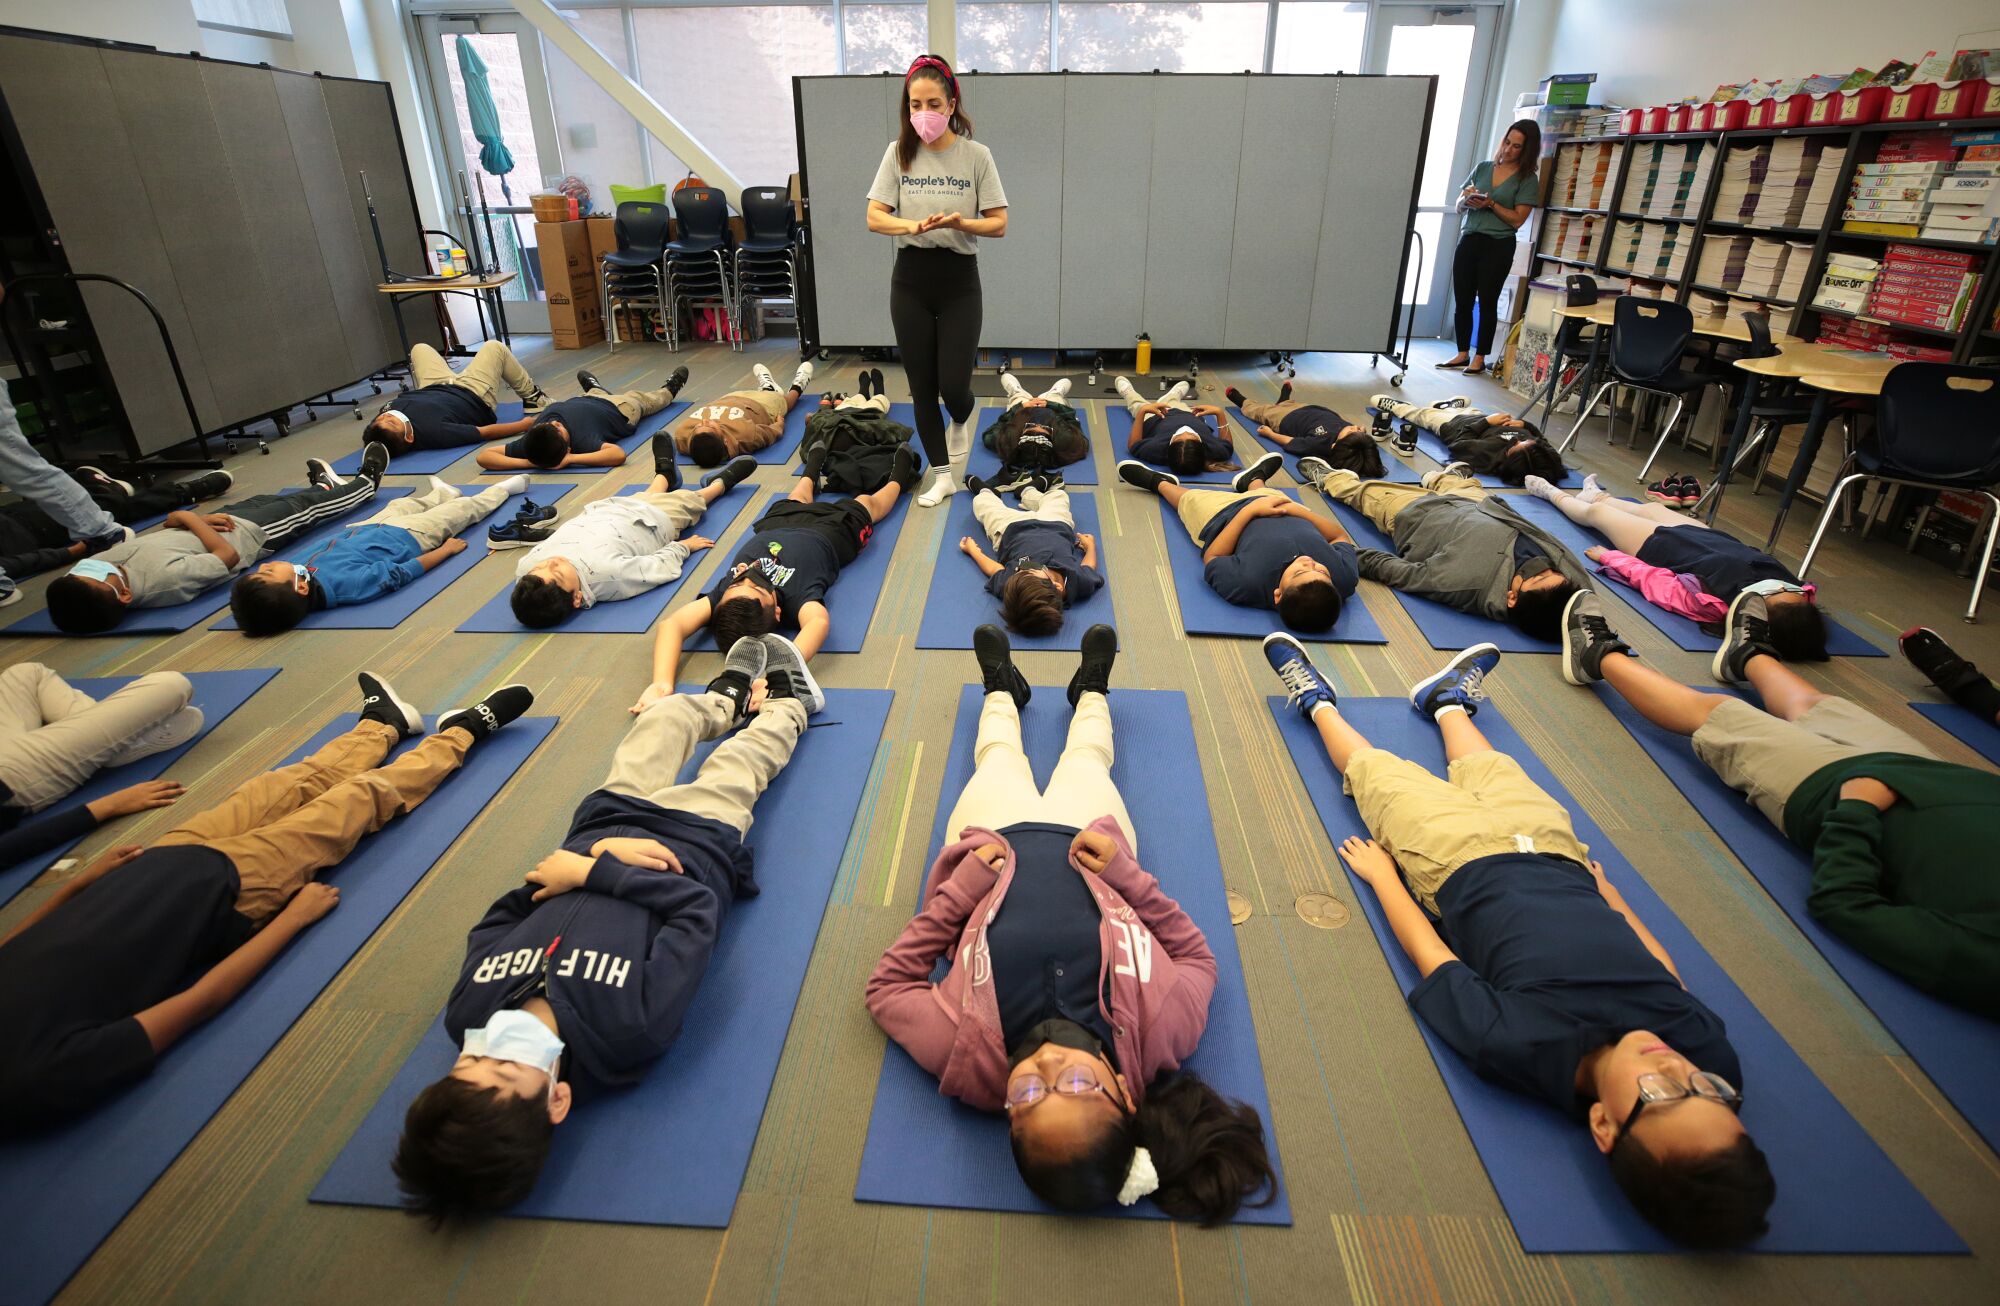 Leah Gallegos, co-founder of People Yoga, leads fifth grade at Accelerated Charter Elementary 